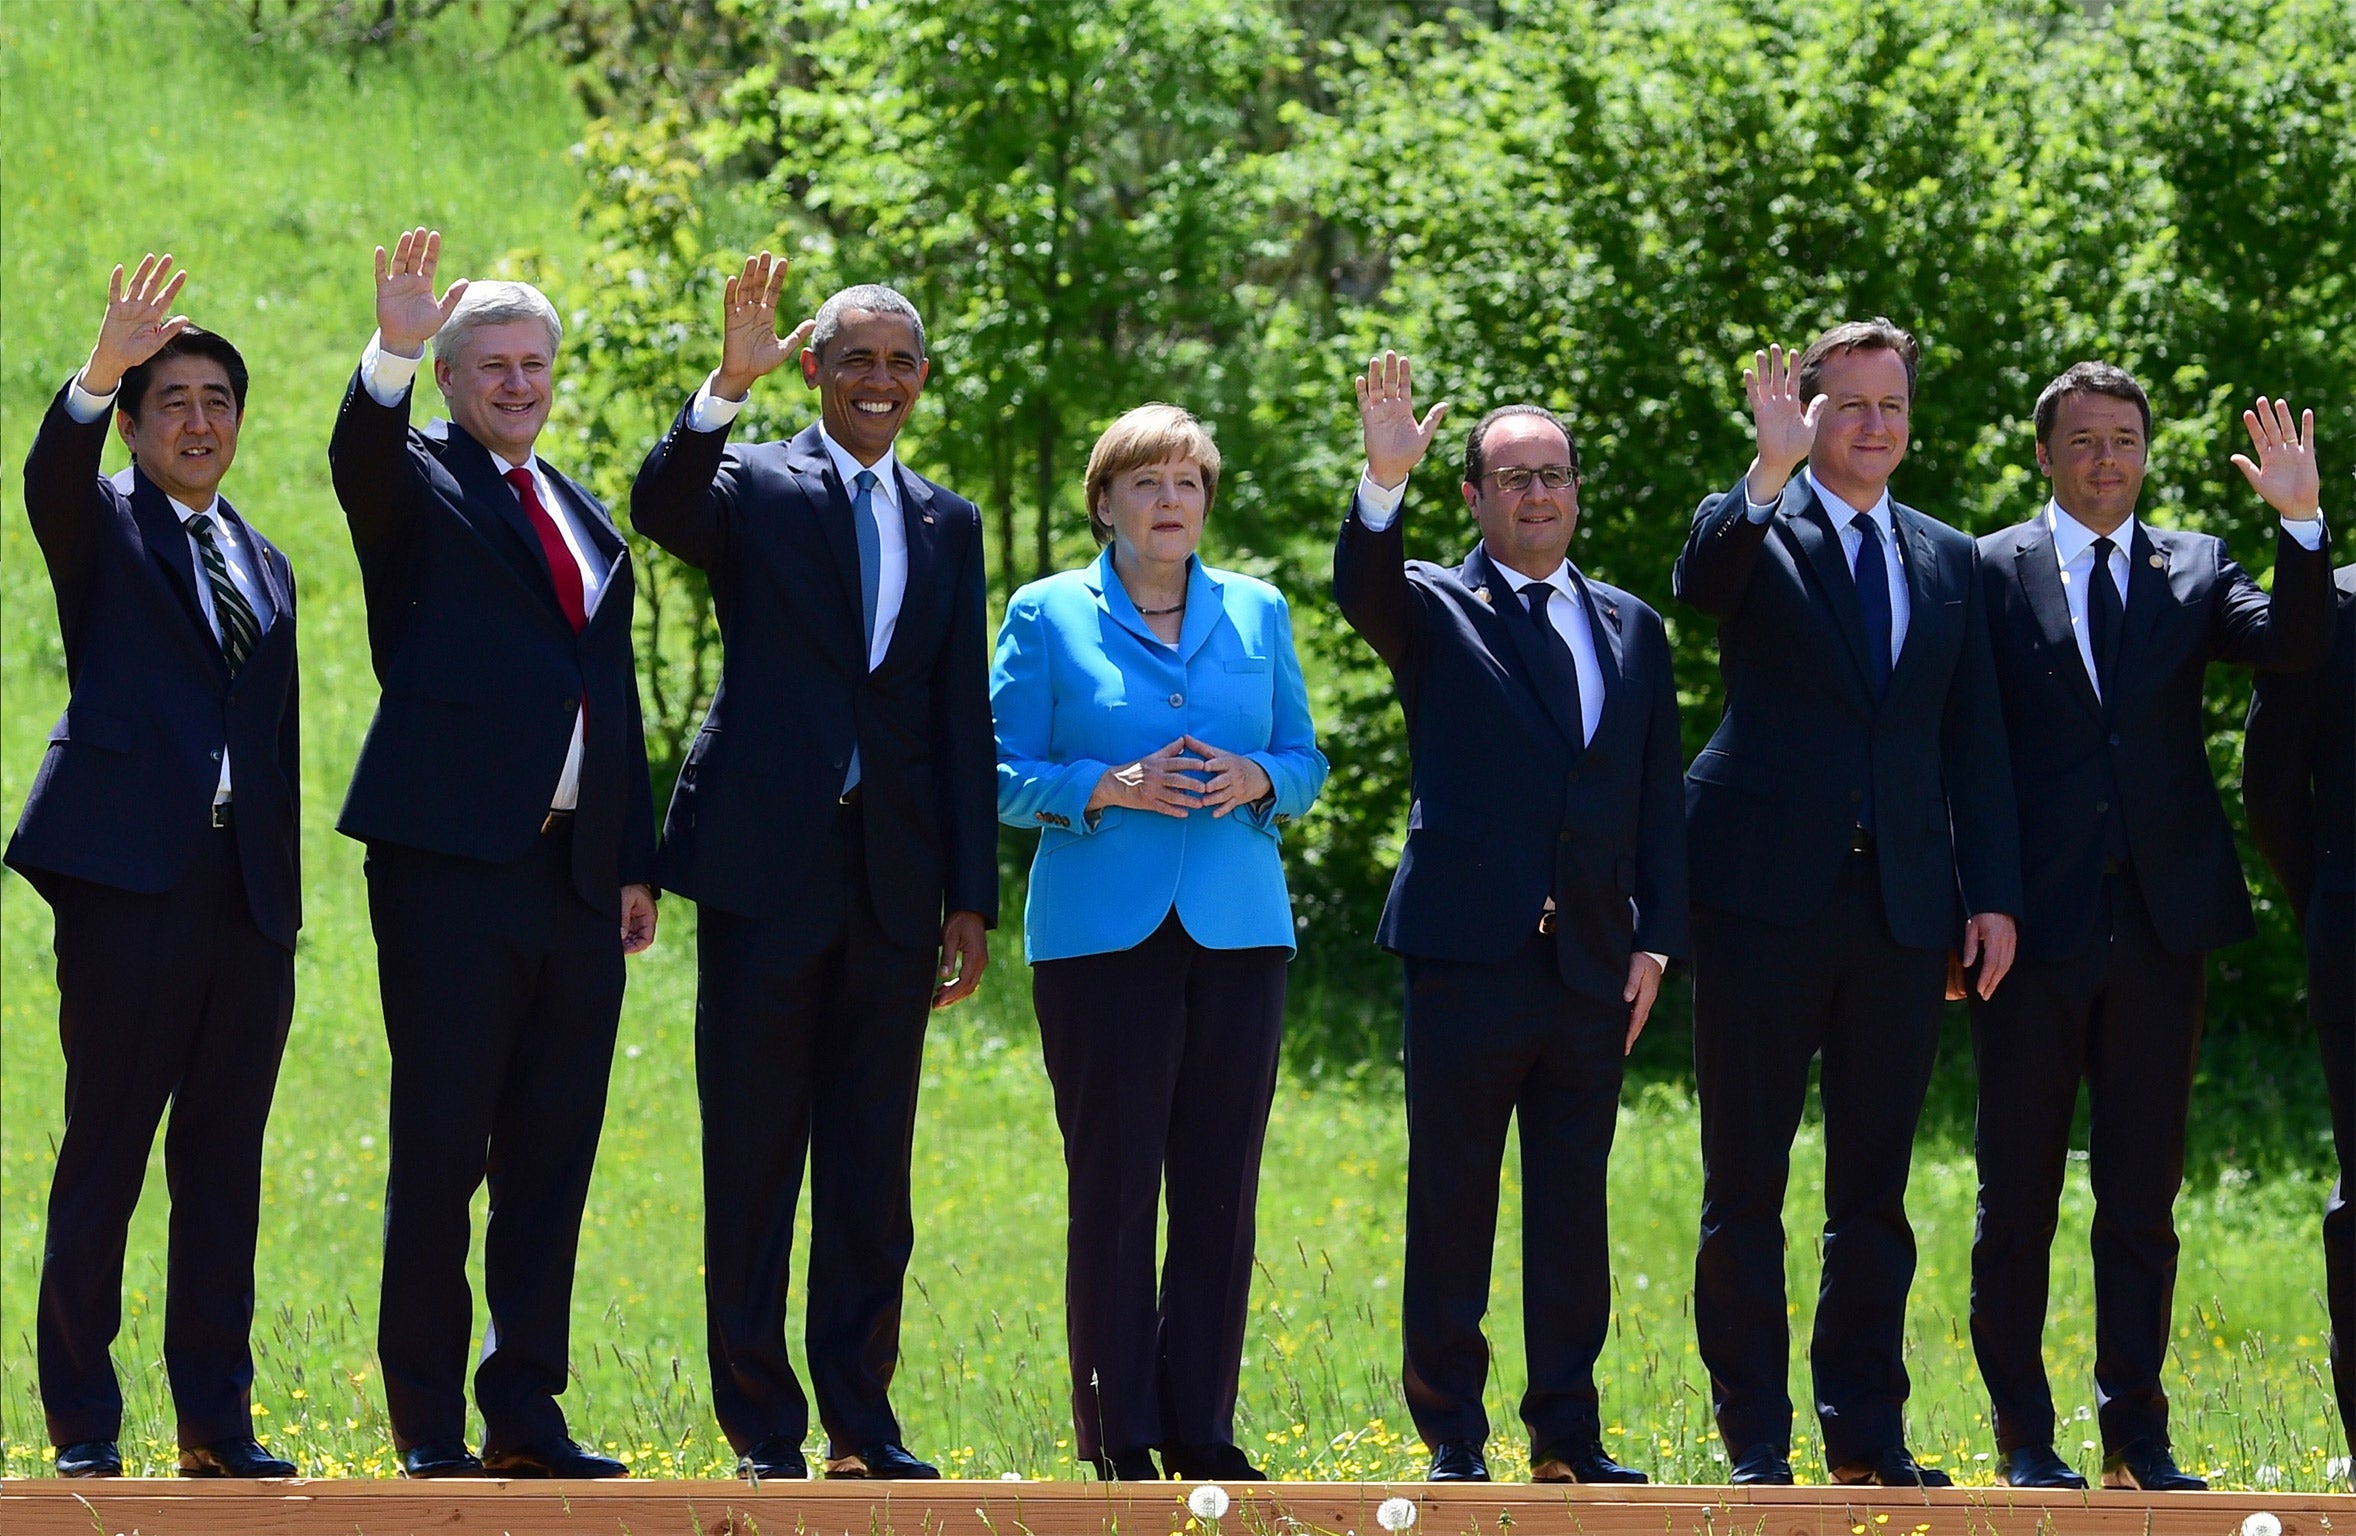 All the G7 countries, with the exception of Japan, have put de facto curbs on deficit spending